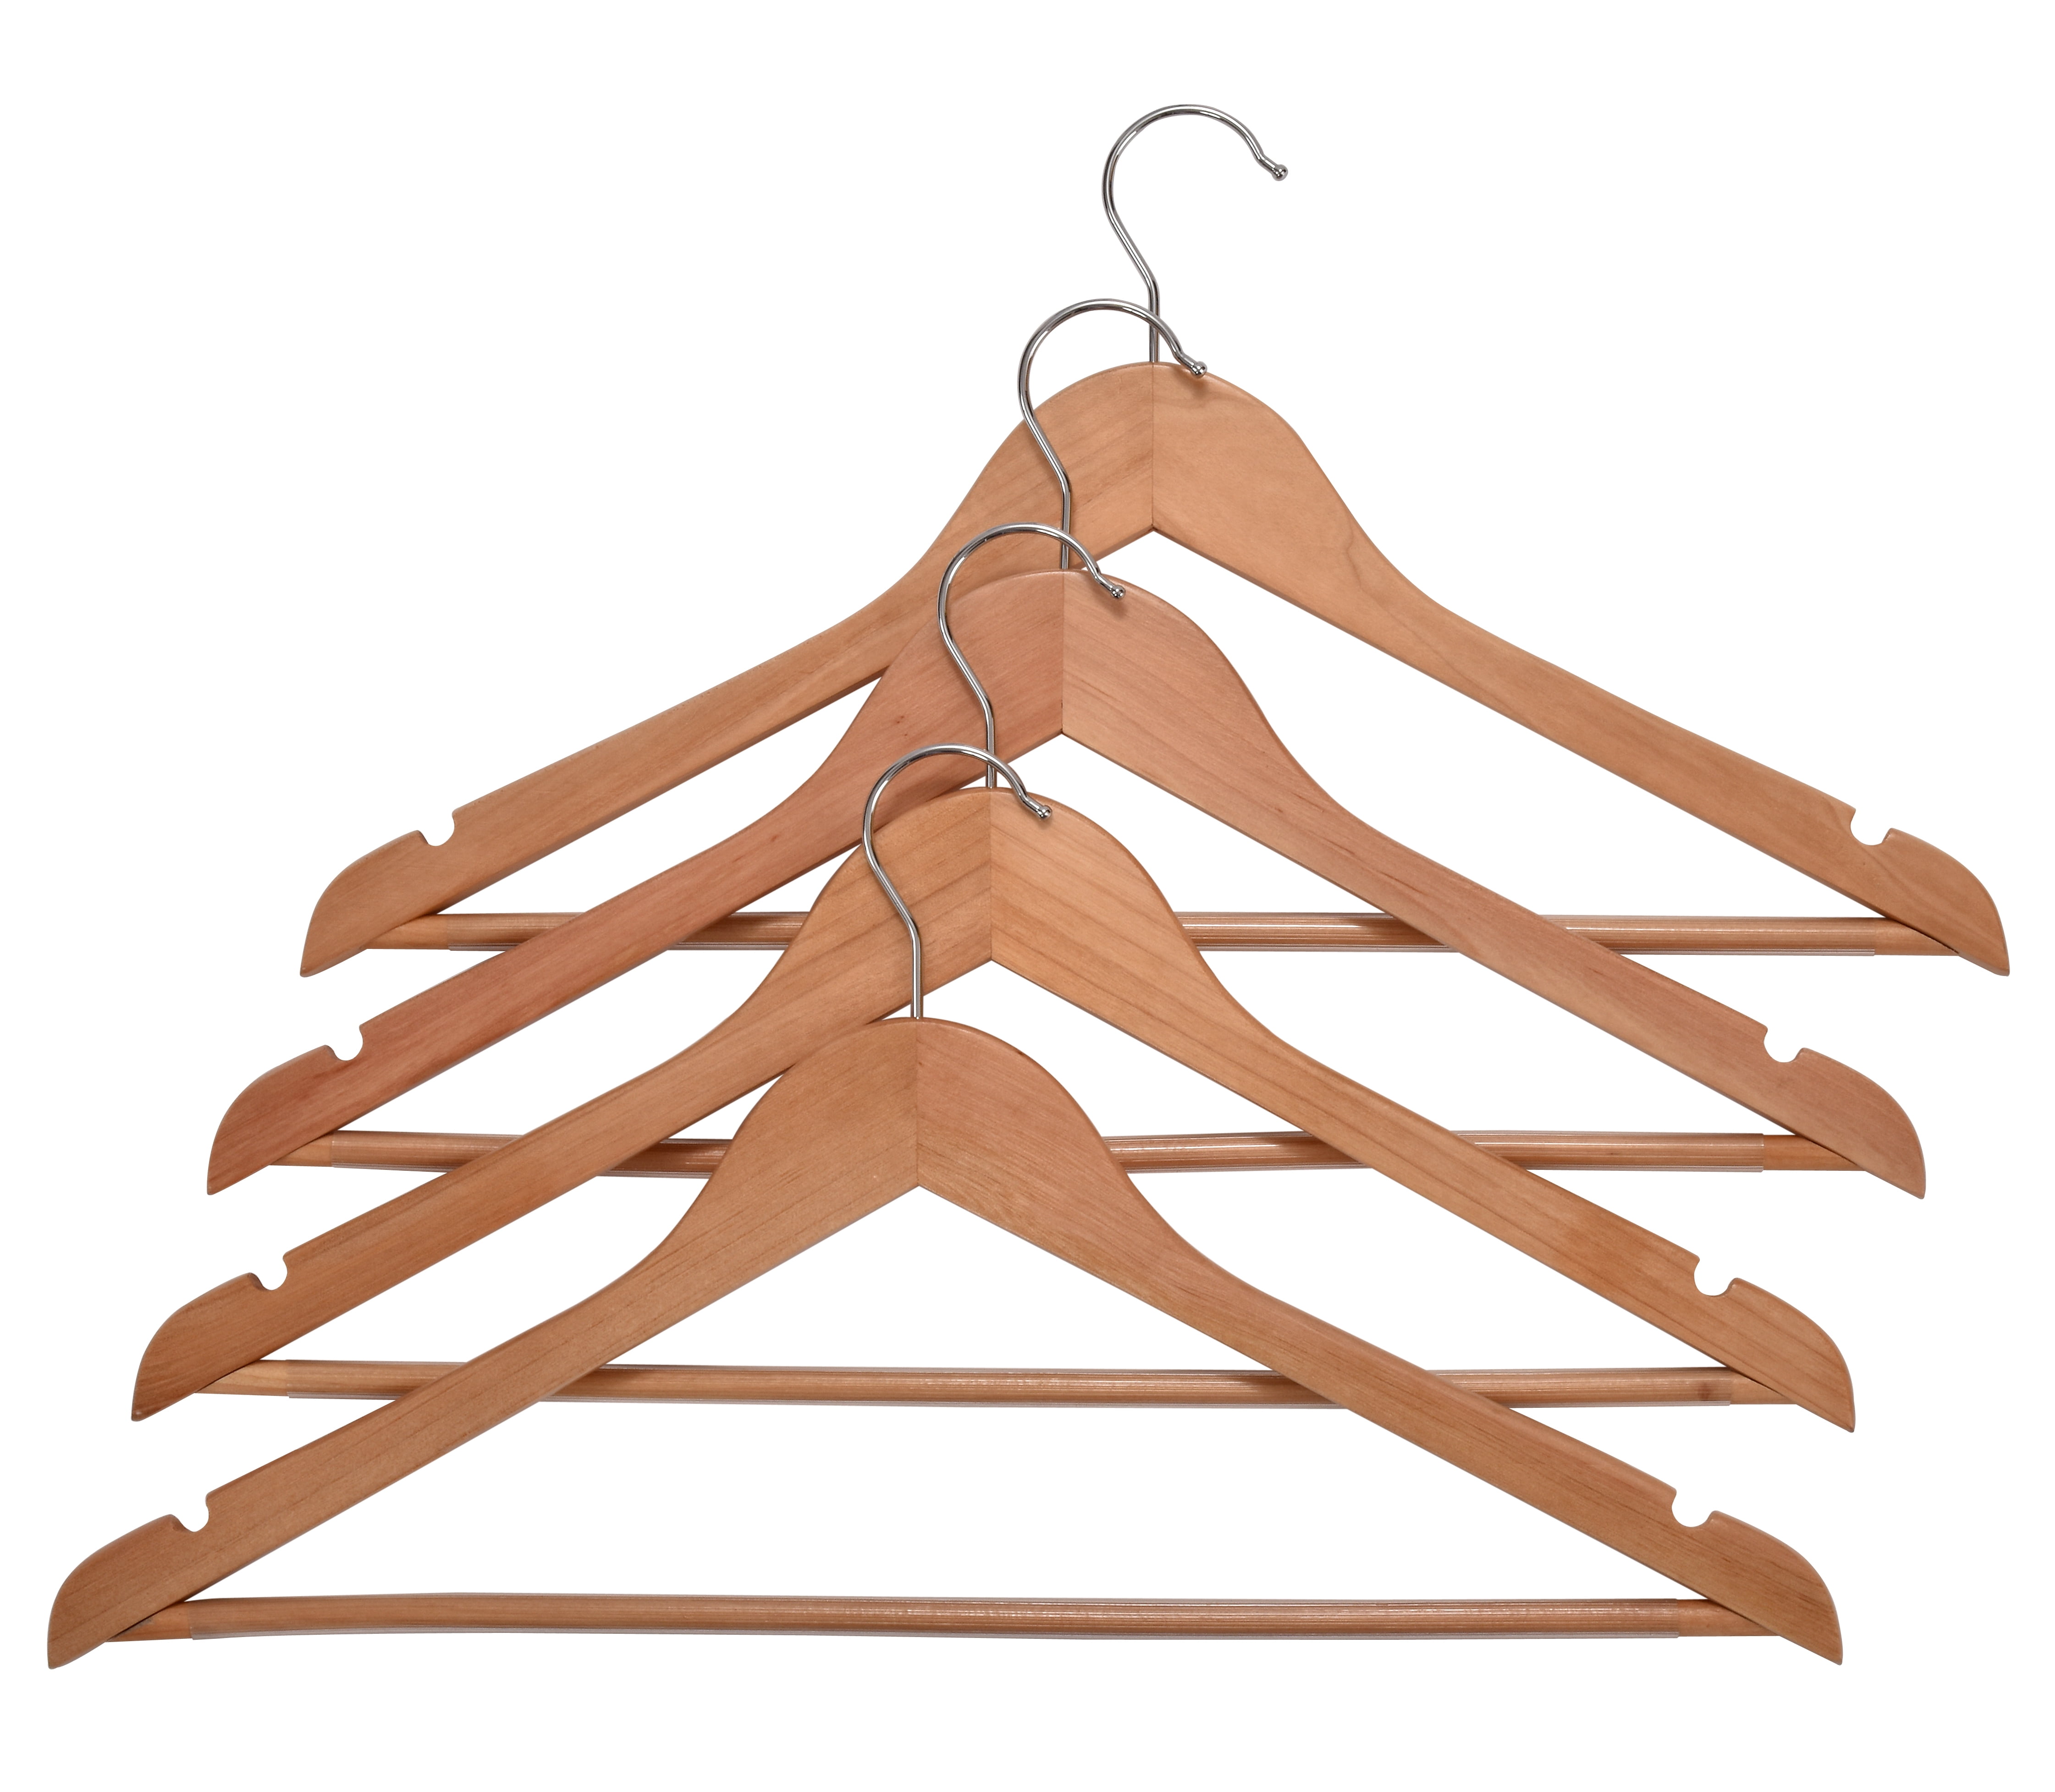 Osto 30 Pack Cherry Wooden Suit Hangers; Ultra-durable Smooth